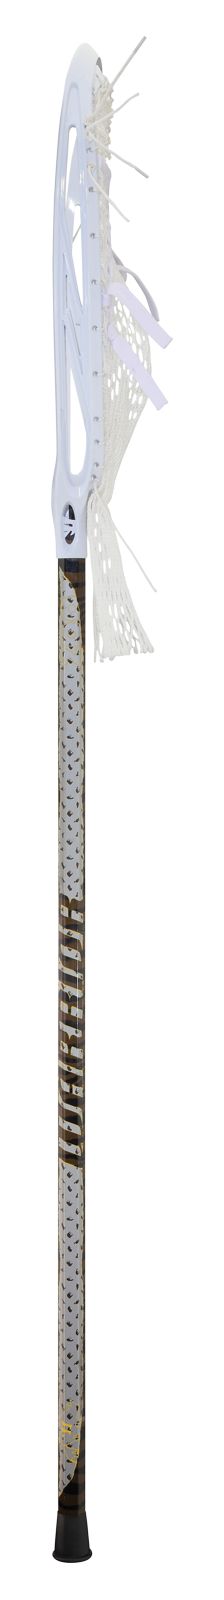 Zoo Complete Stick, Black with White image number 1